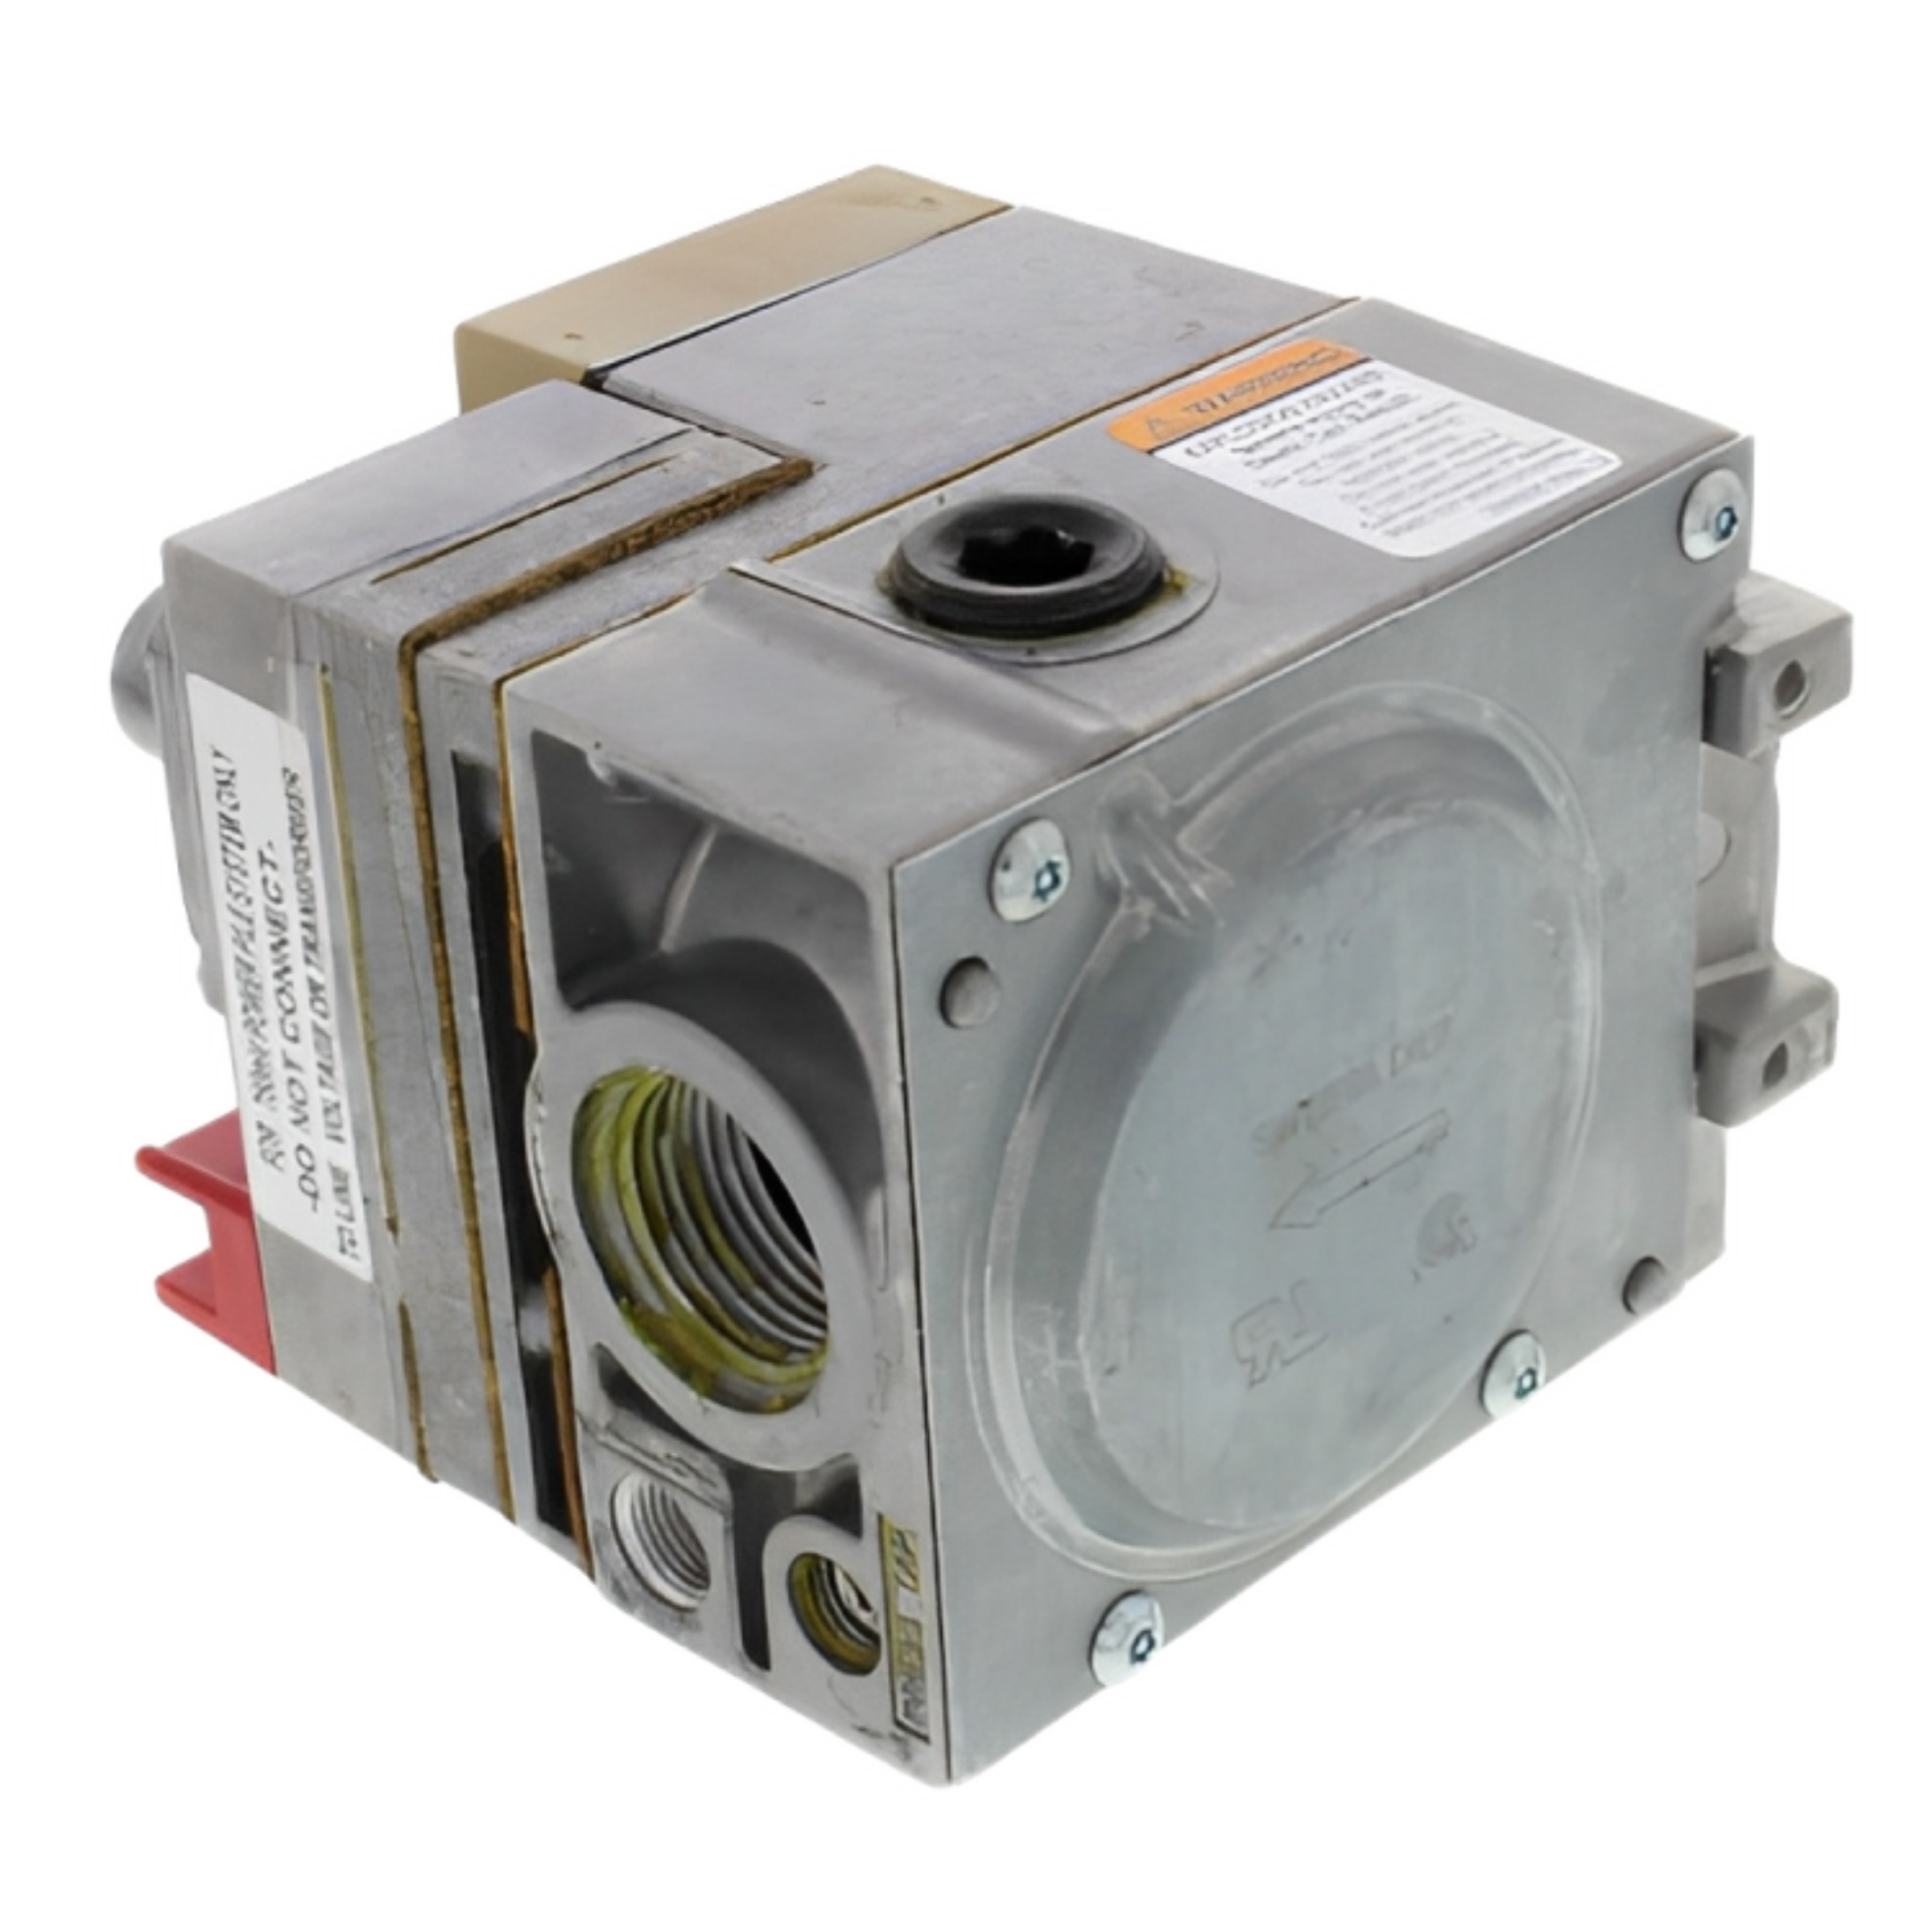 VS820A1054 Honeywell Home Millivoltage Standard Opening Gas Valve. 750mV , 3/4 x 3/4" with 1/2" side outlets. Set 3.5" WC. Max Capacity 425,000 BTU/hr